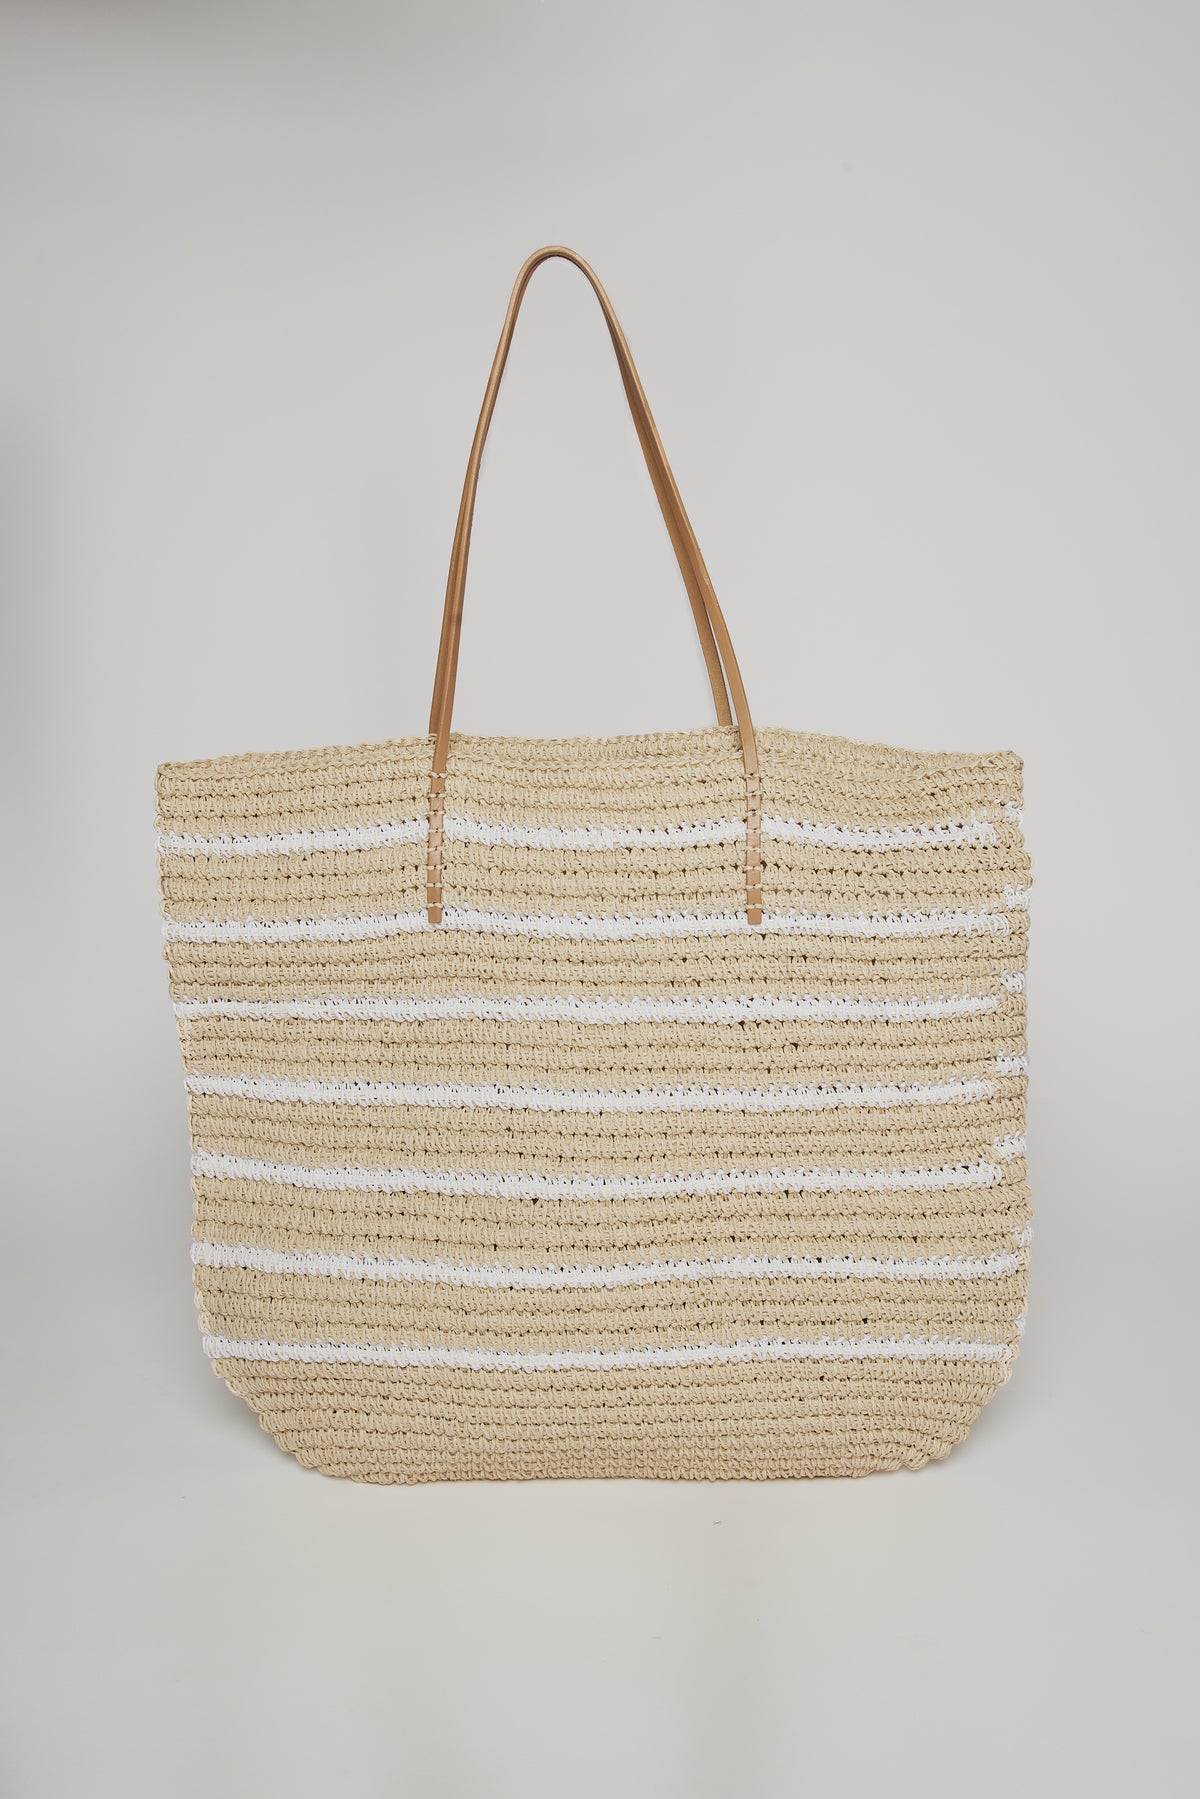   A large STELLA STRIPE TOTE by Velvet by Graham & Spencer, with beige and white stripes, featuring long leather handles, displayed against a plain background. 